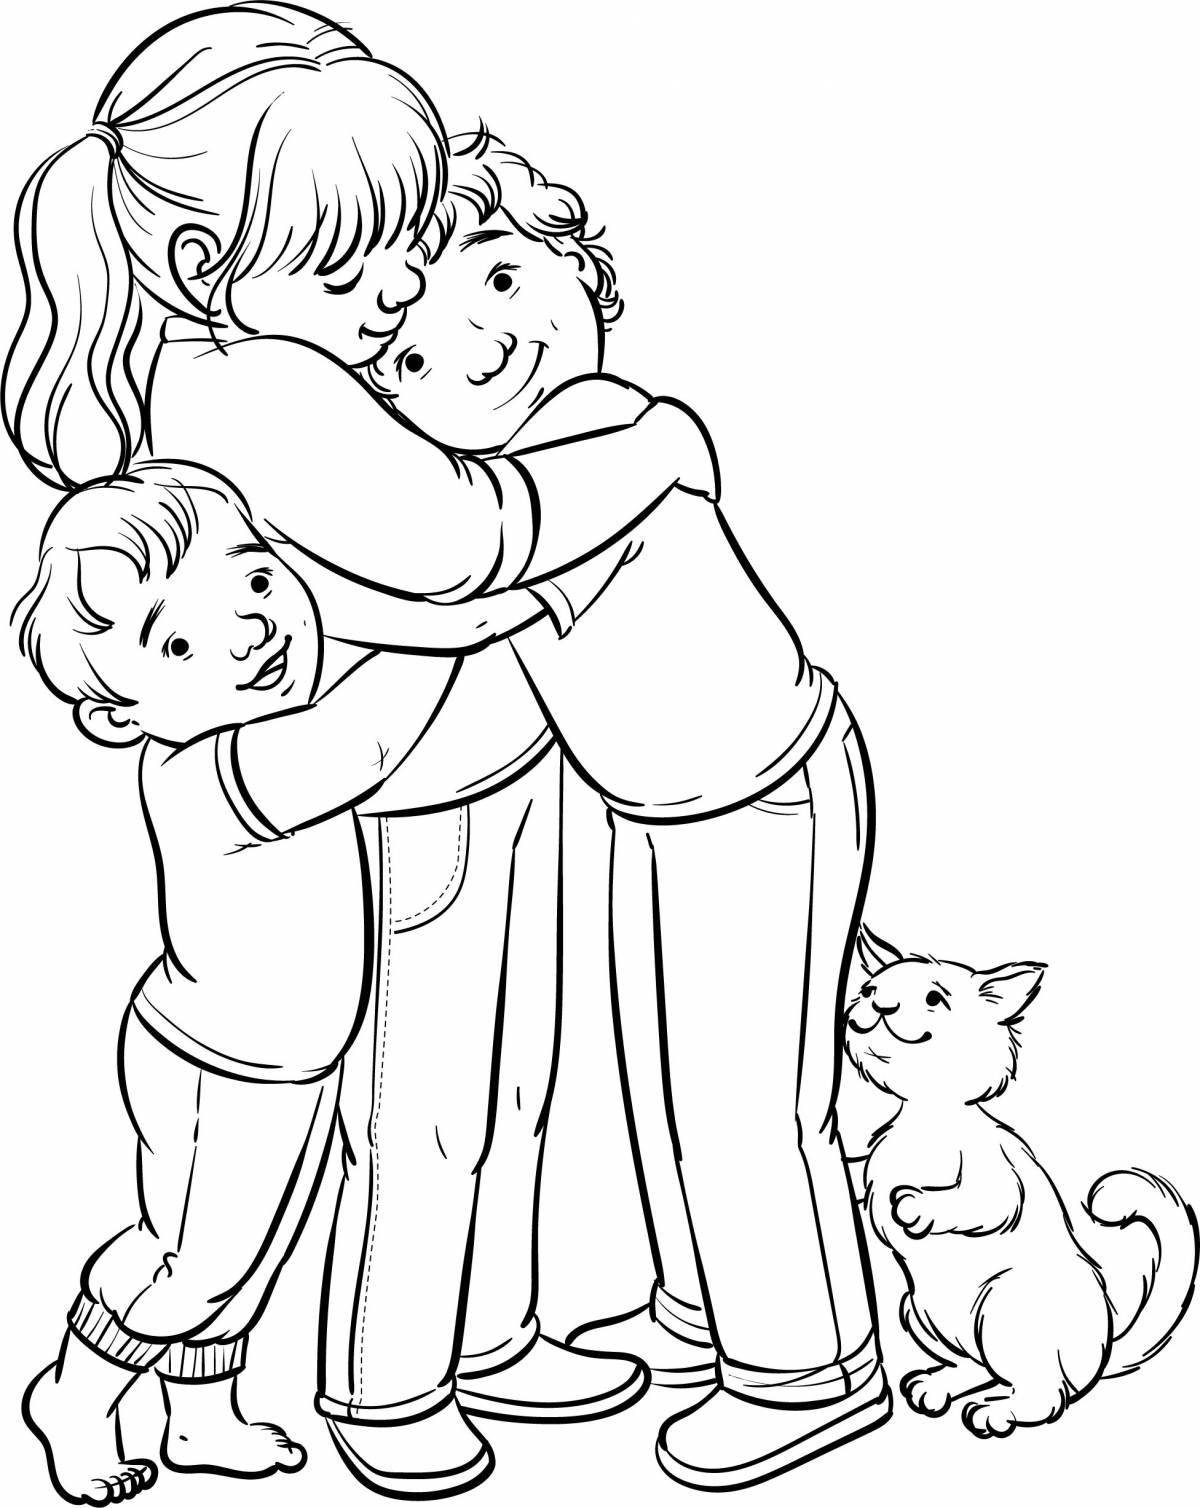 Serene hug coloring pages